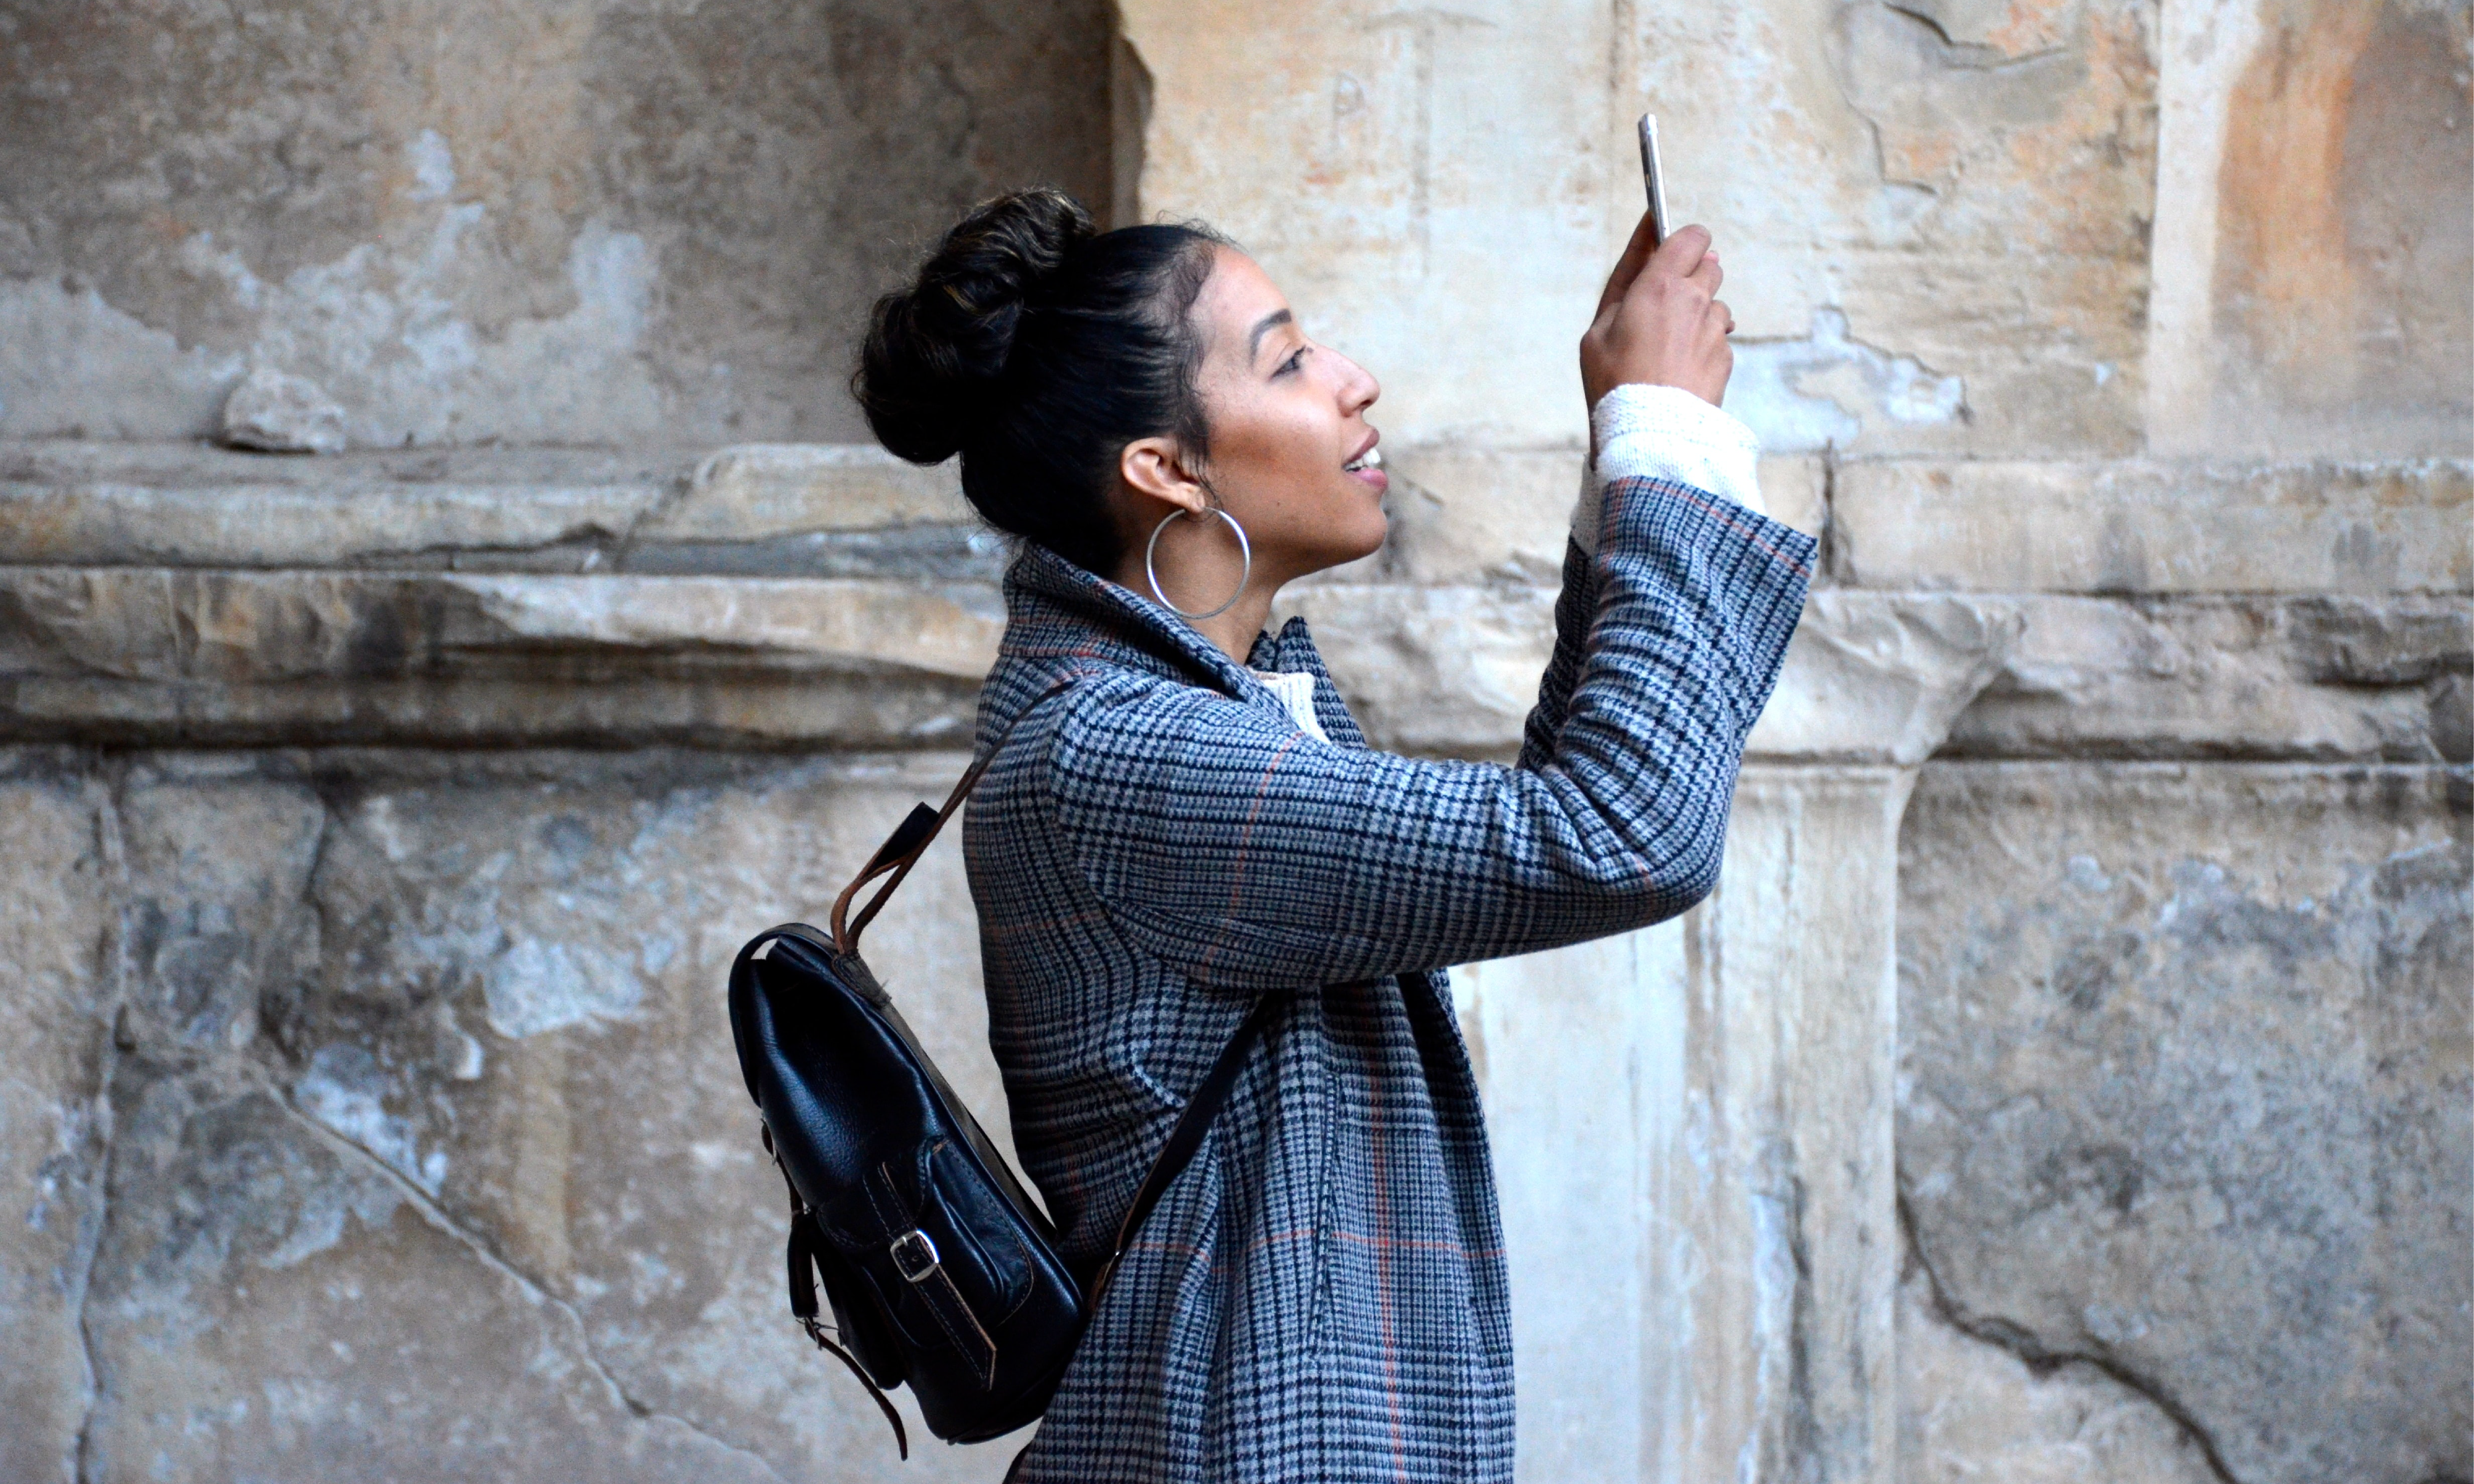 A woman takes a picture with her mobile phone.